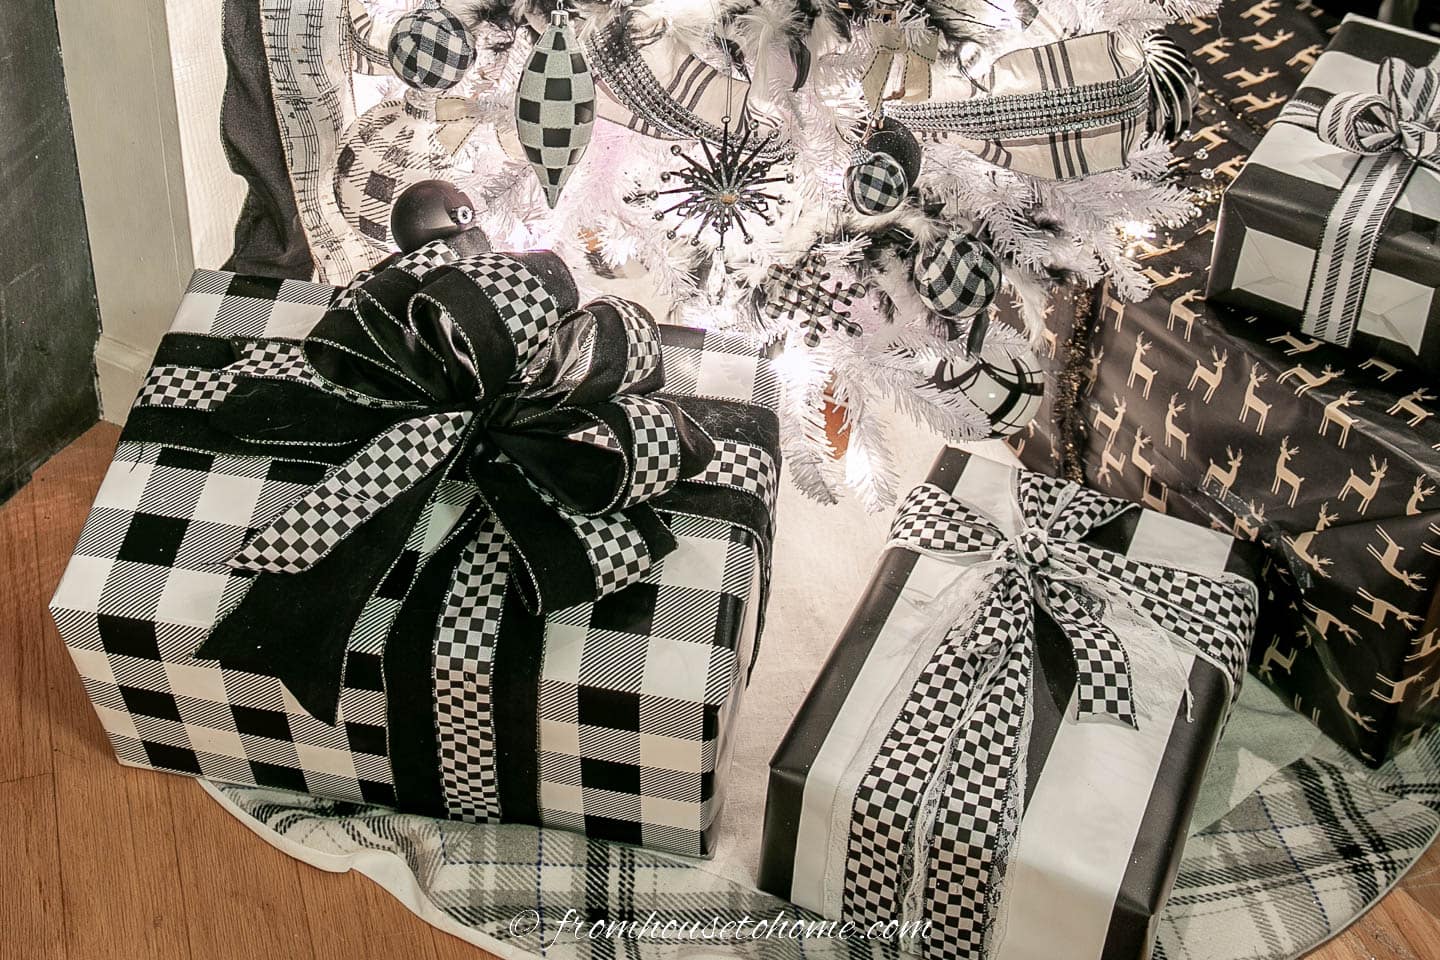 Presents wrapped with black and white paper and tied with black and white ribbons